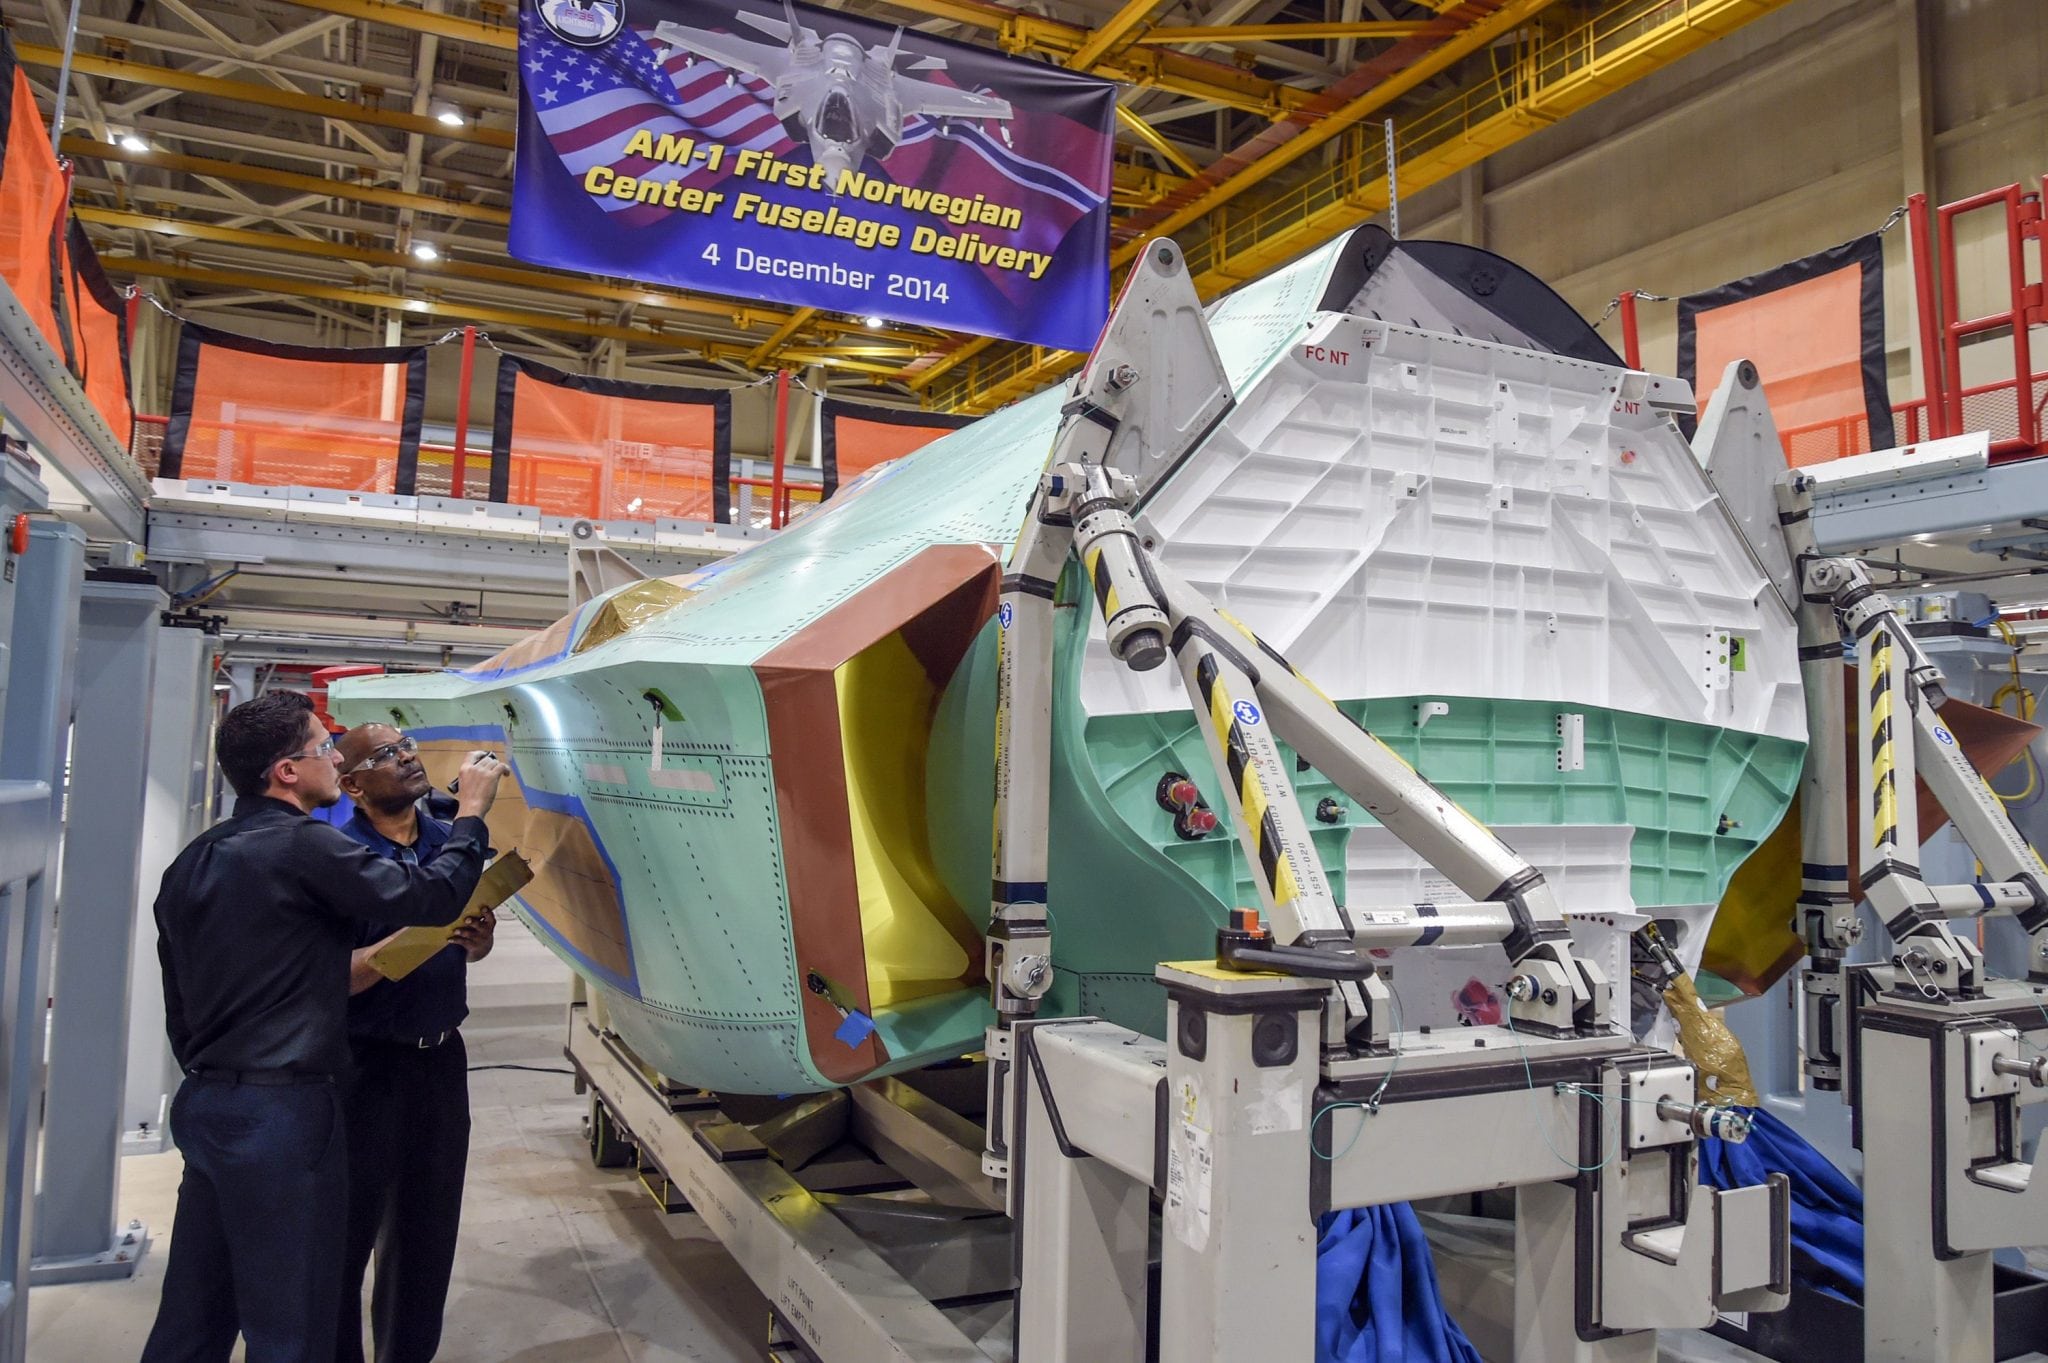 Technicians at Northrop Grumman's Palmdale (Calif.) Aircraft Integration Center of Excellence conduct final quality inspections on the center fuselage for AM-1